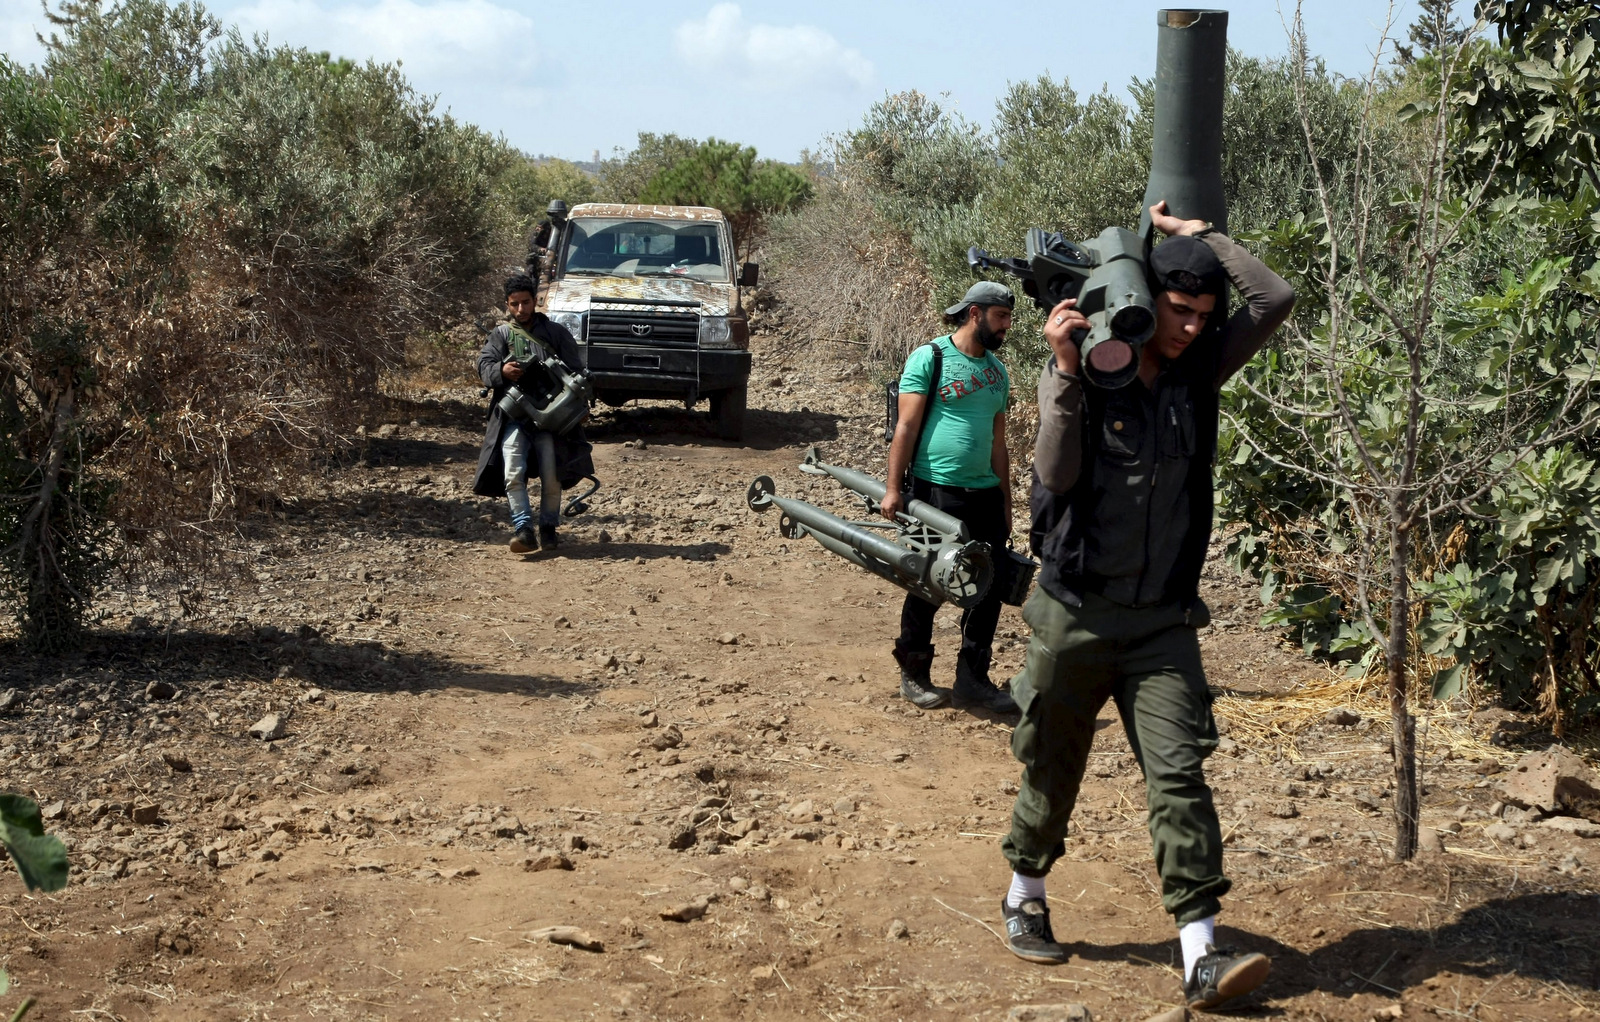 Free Syrian Army fighters carry a weapon during preparations for an operation to strike at forces loyal to Syria's president Bashar Al-Assad in western countryside of Damascus, Syria September 30, 2015. (Alaa Al-Faqir/Reuters)